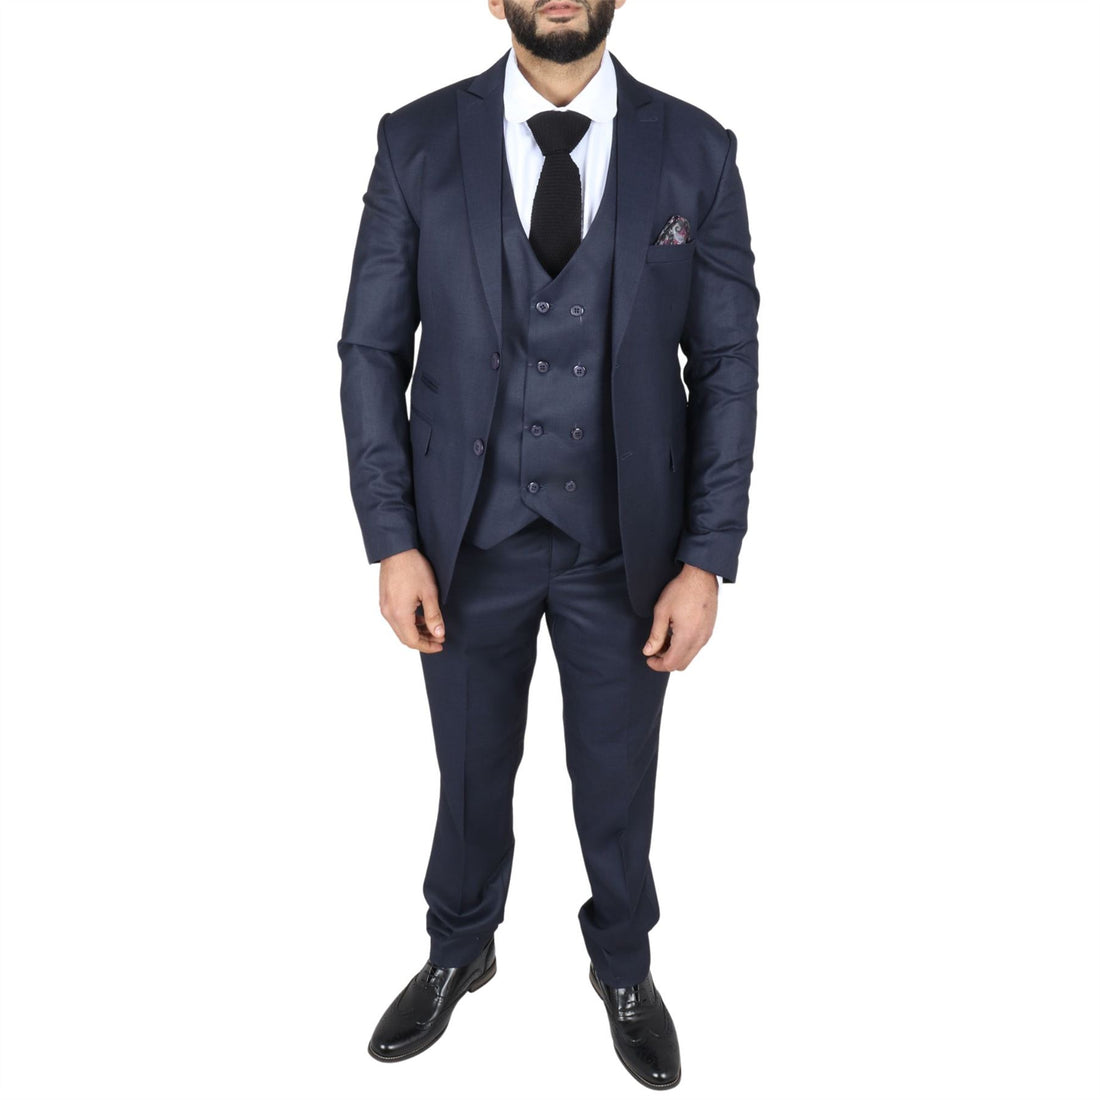 Men's Navy Suit Double Breasted 3 Piece Formal Dress